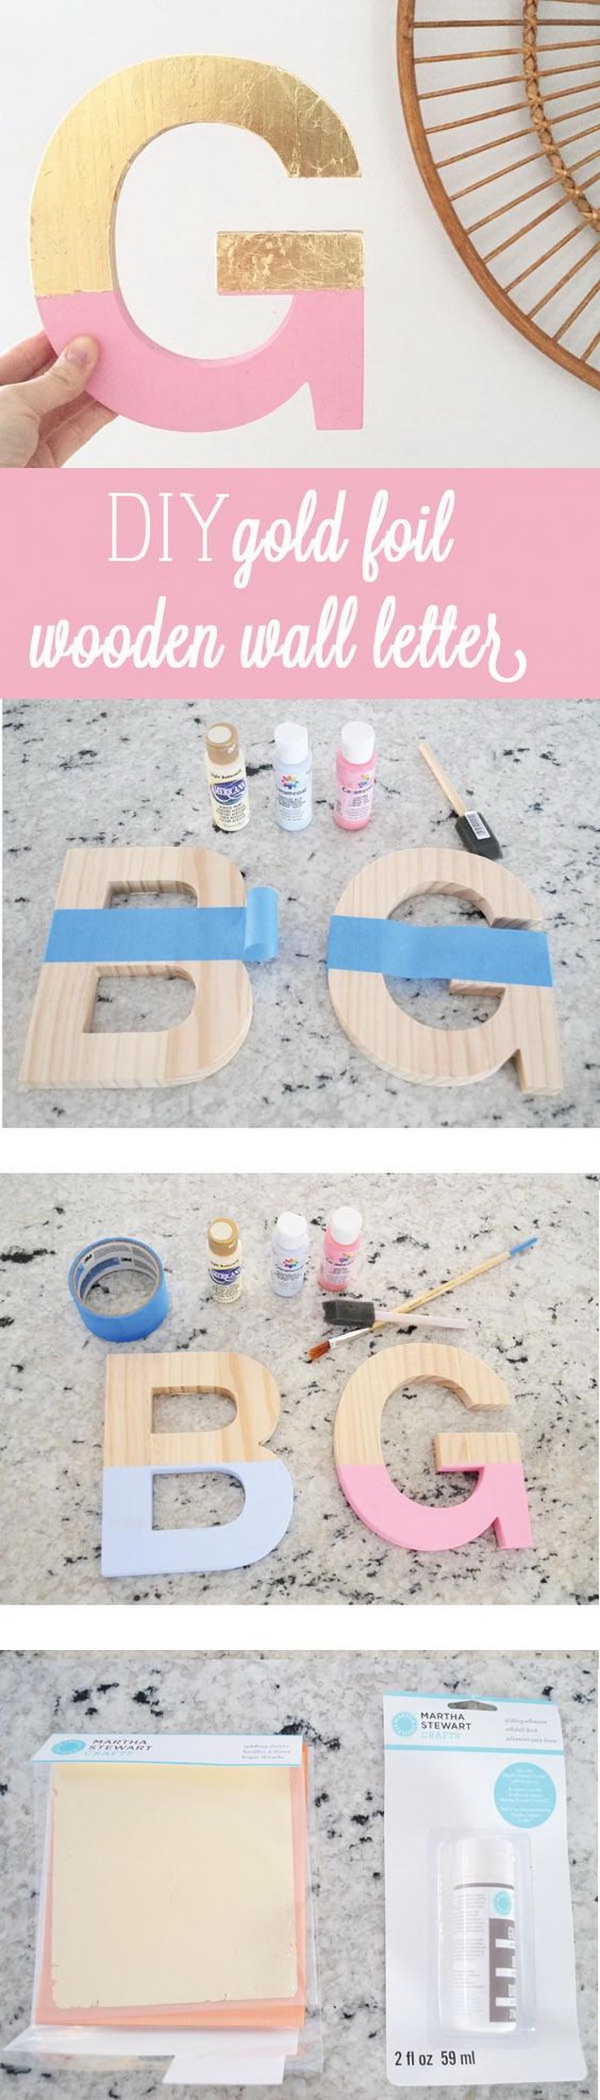 Foil Wooden Letter. Super cute and relatively easy! Look great in kid's room!